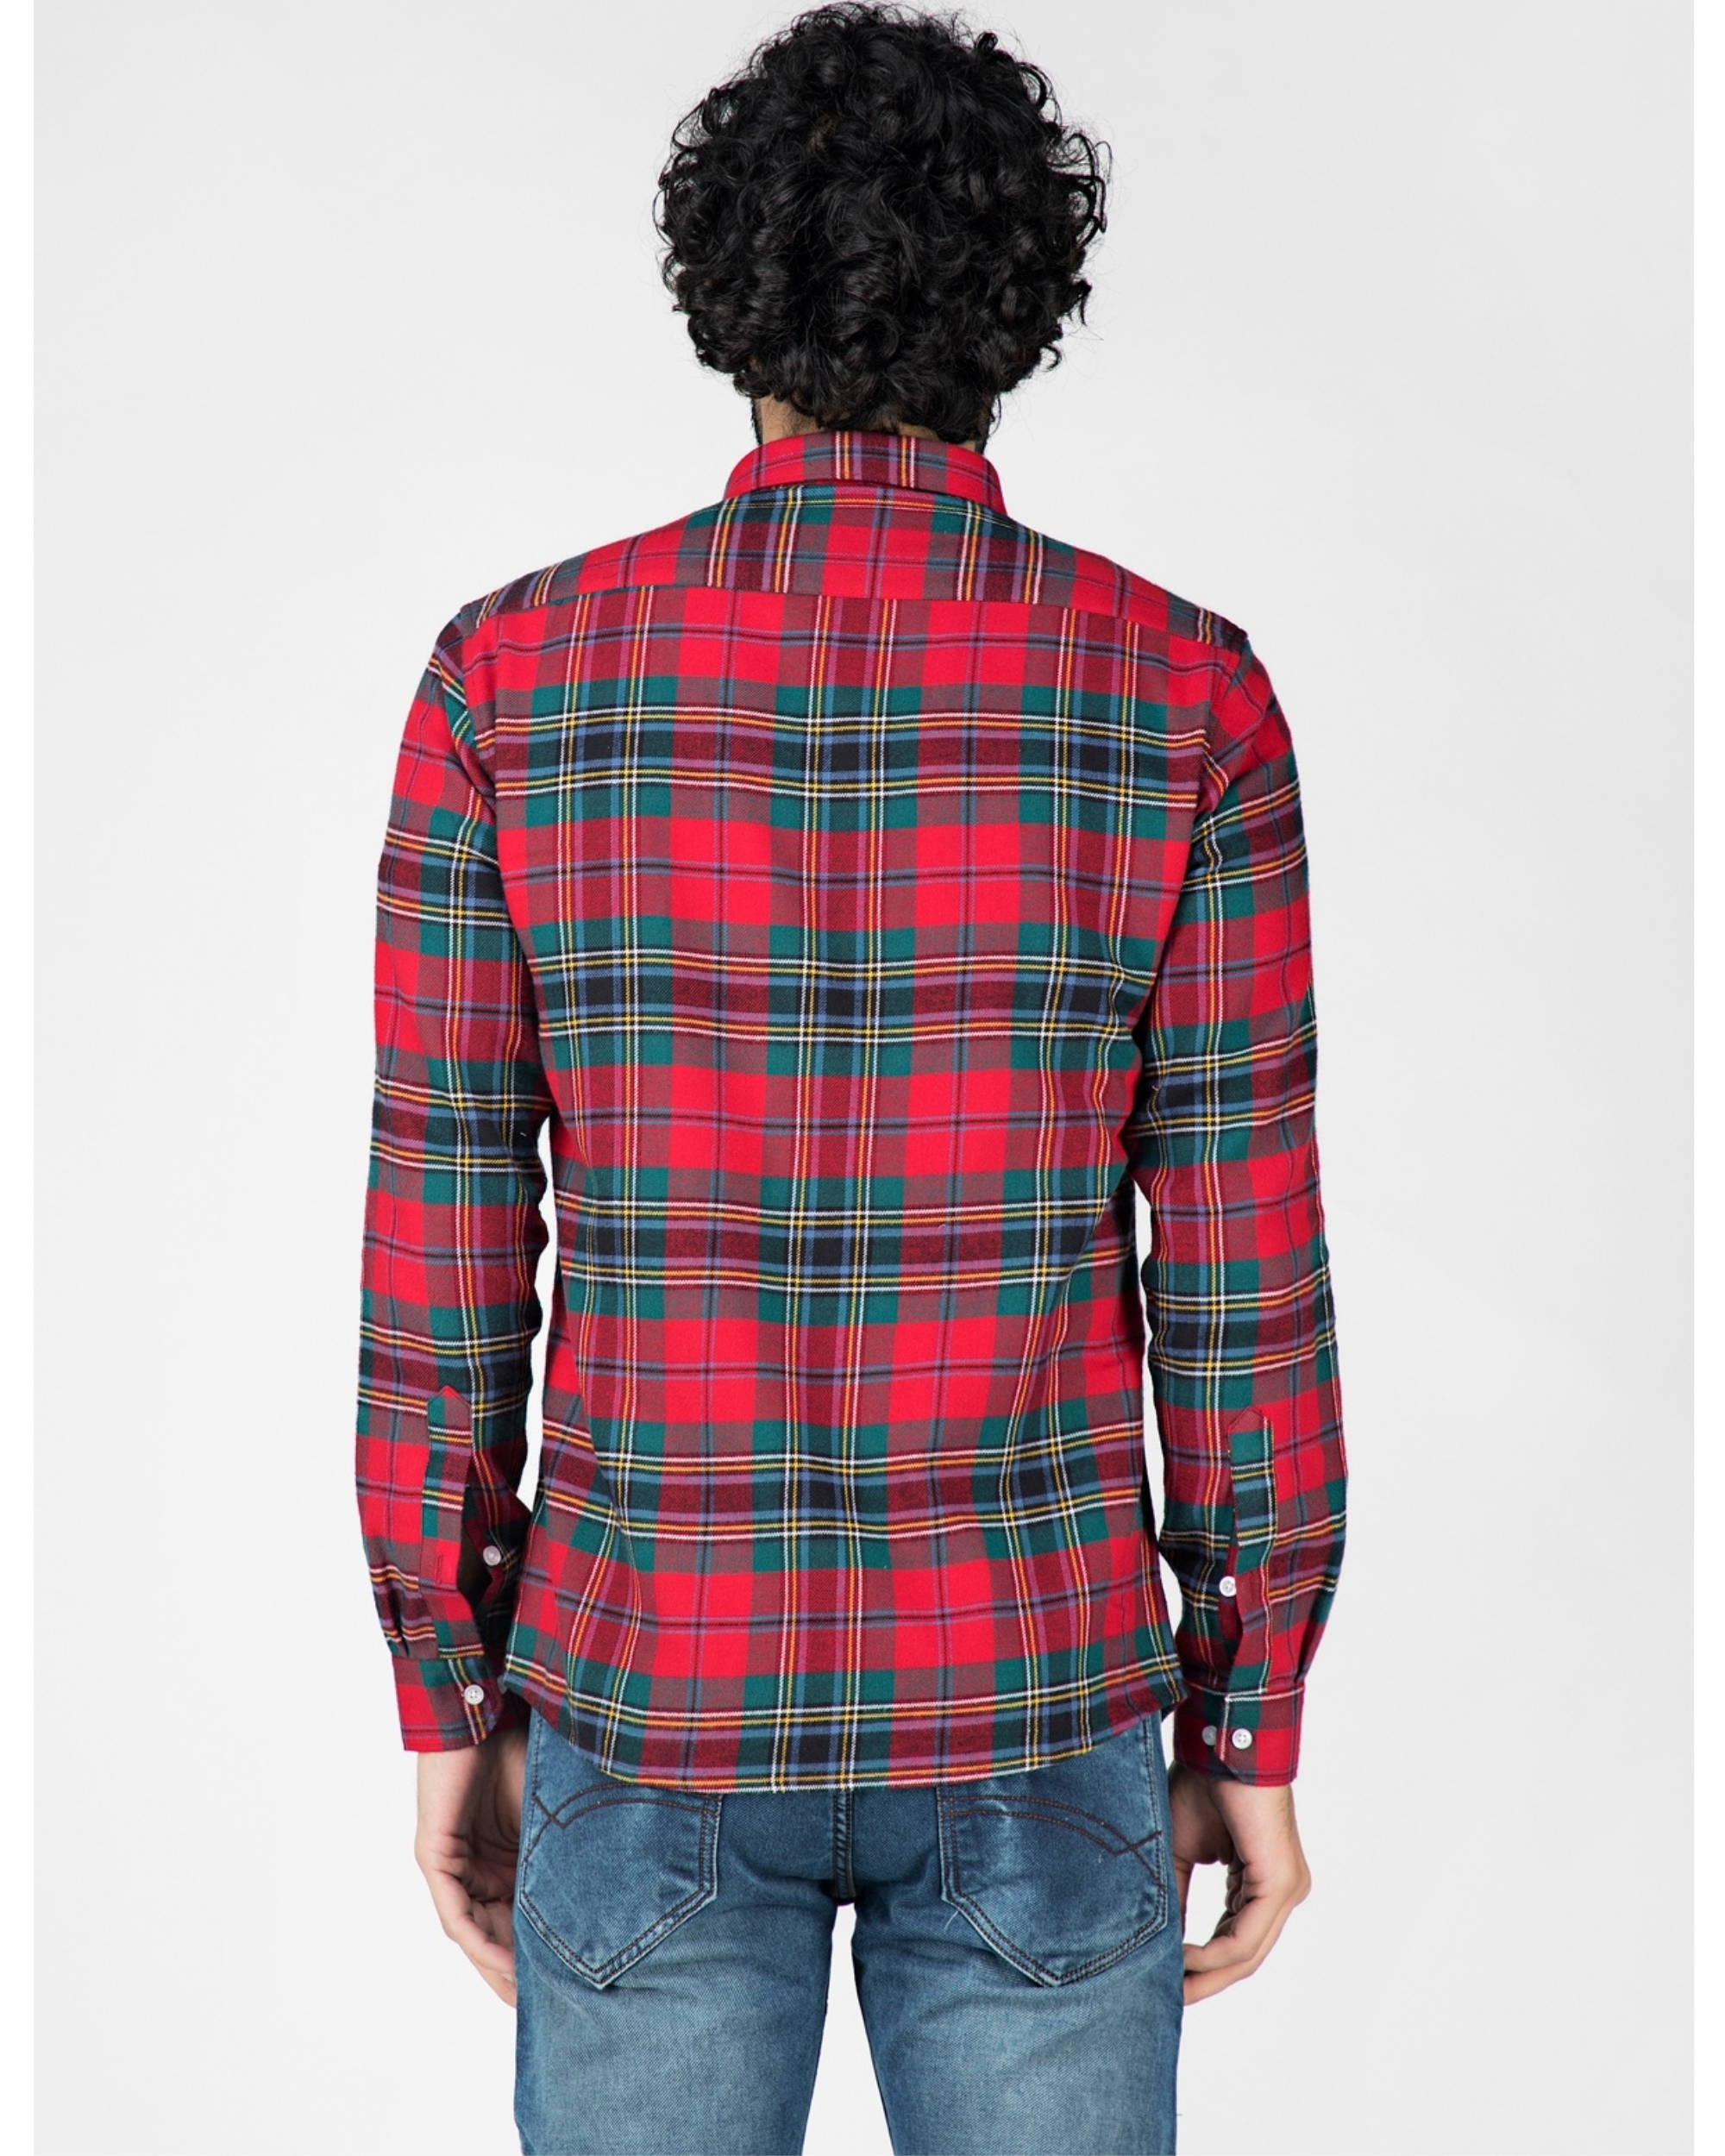 Red and green school plaid shirt by Green Hill | The Secret Label